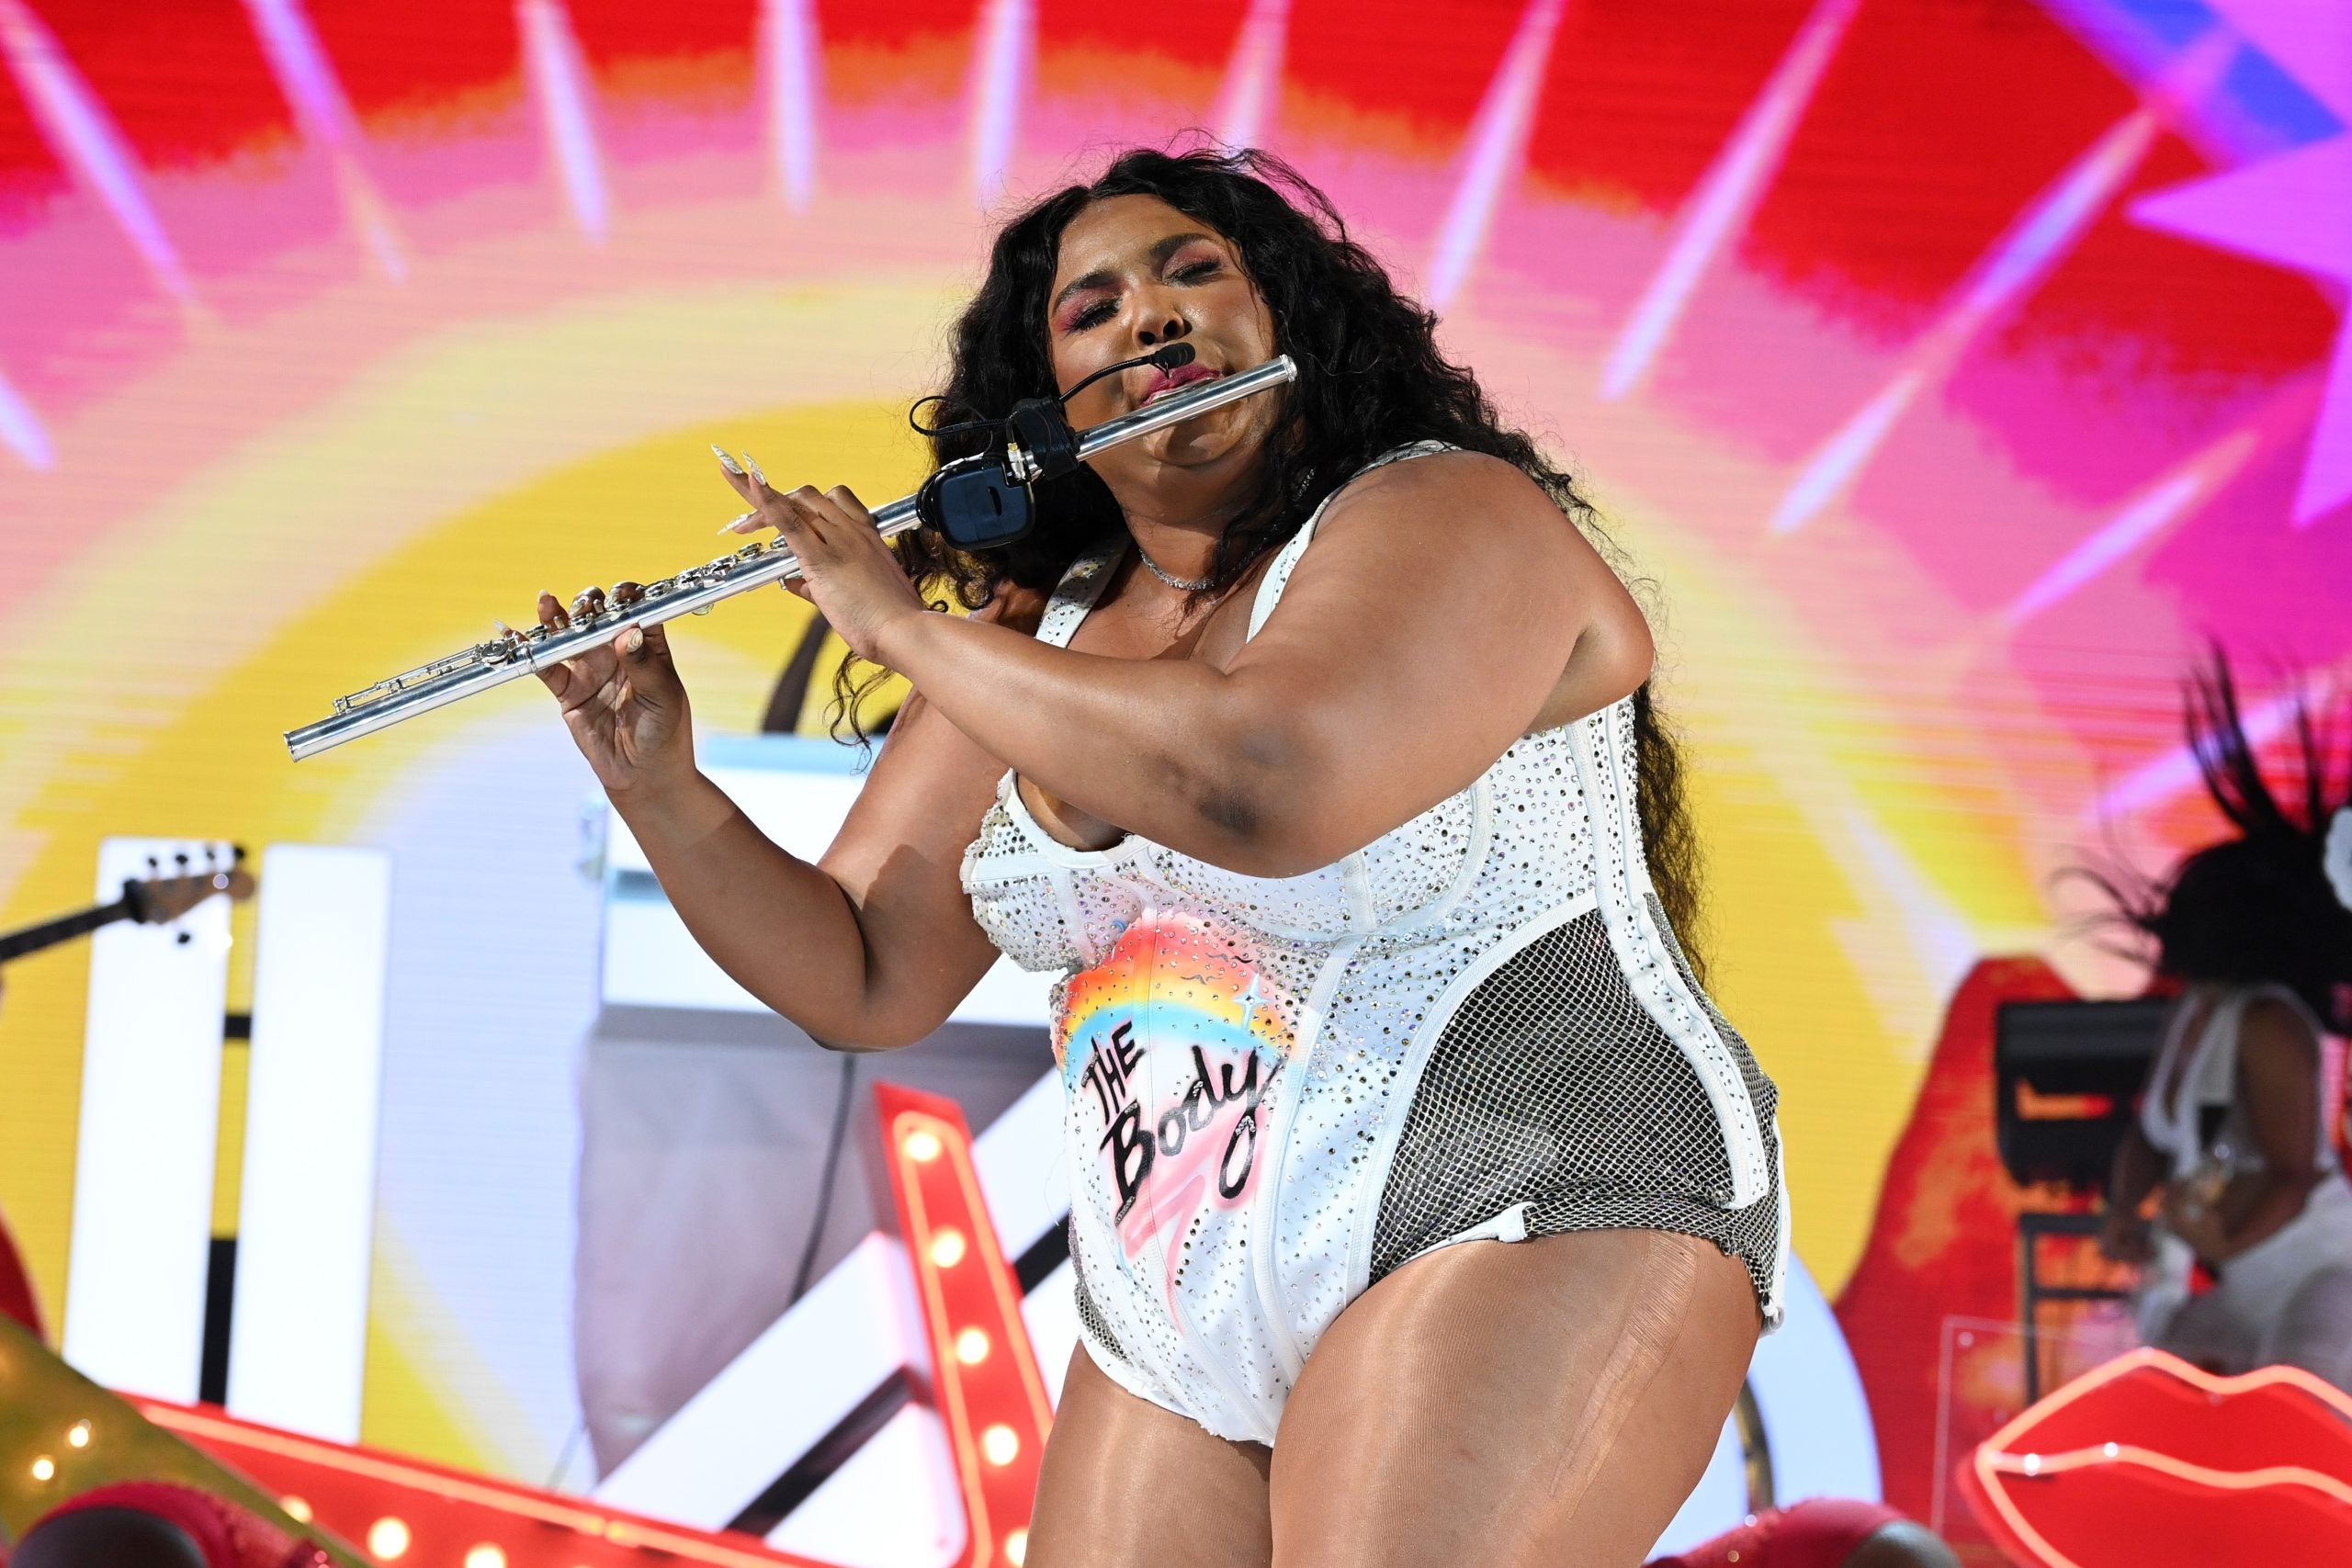 ESSENCE Nov/Dec Cover Star Lizzo Shuts Down South Beach With AMEX UNSTAGED Performance